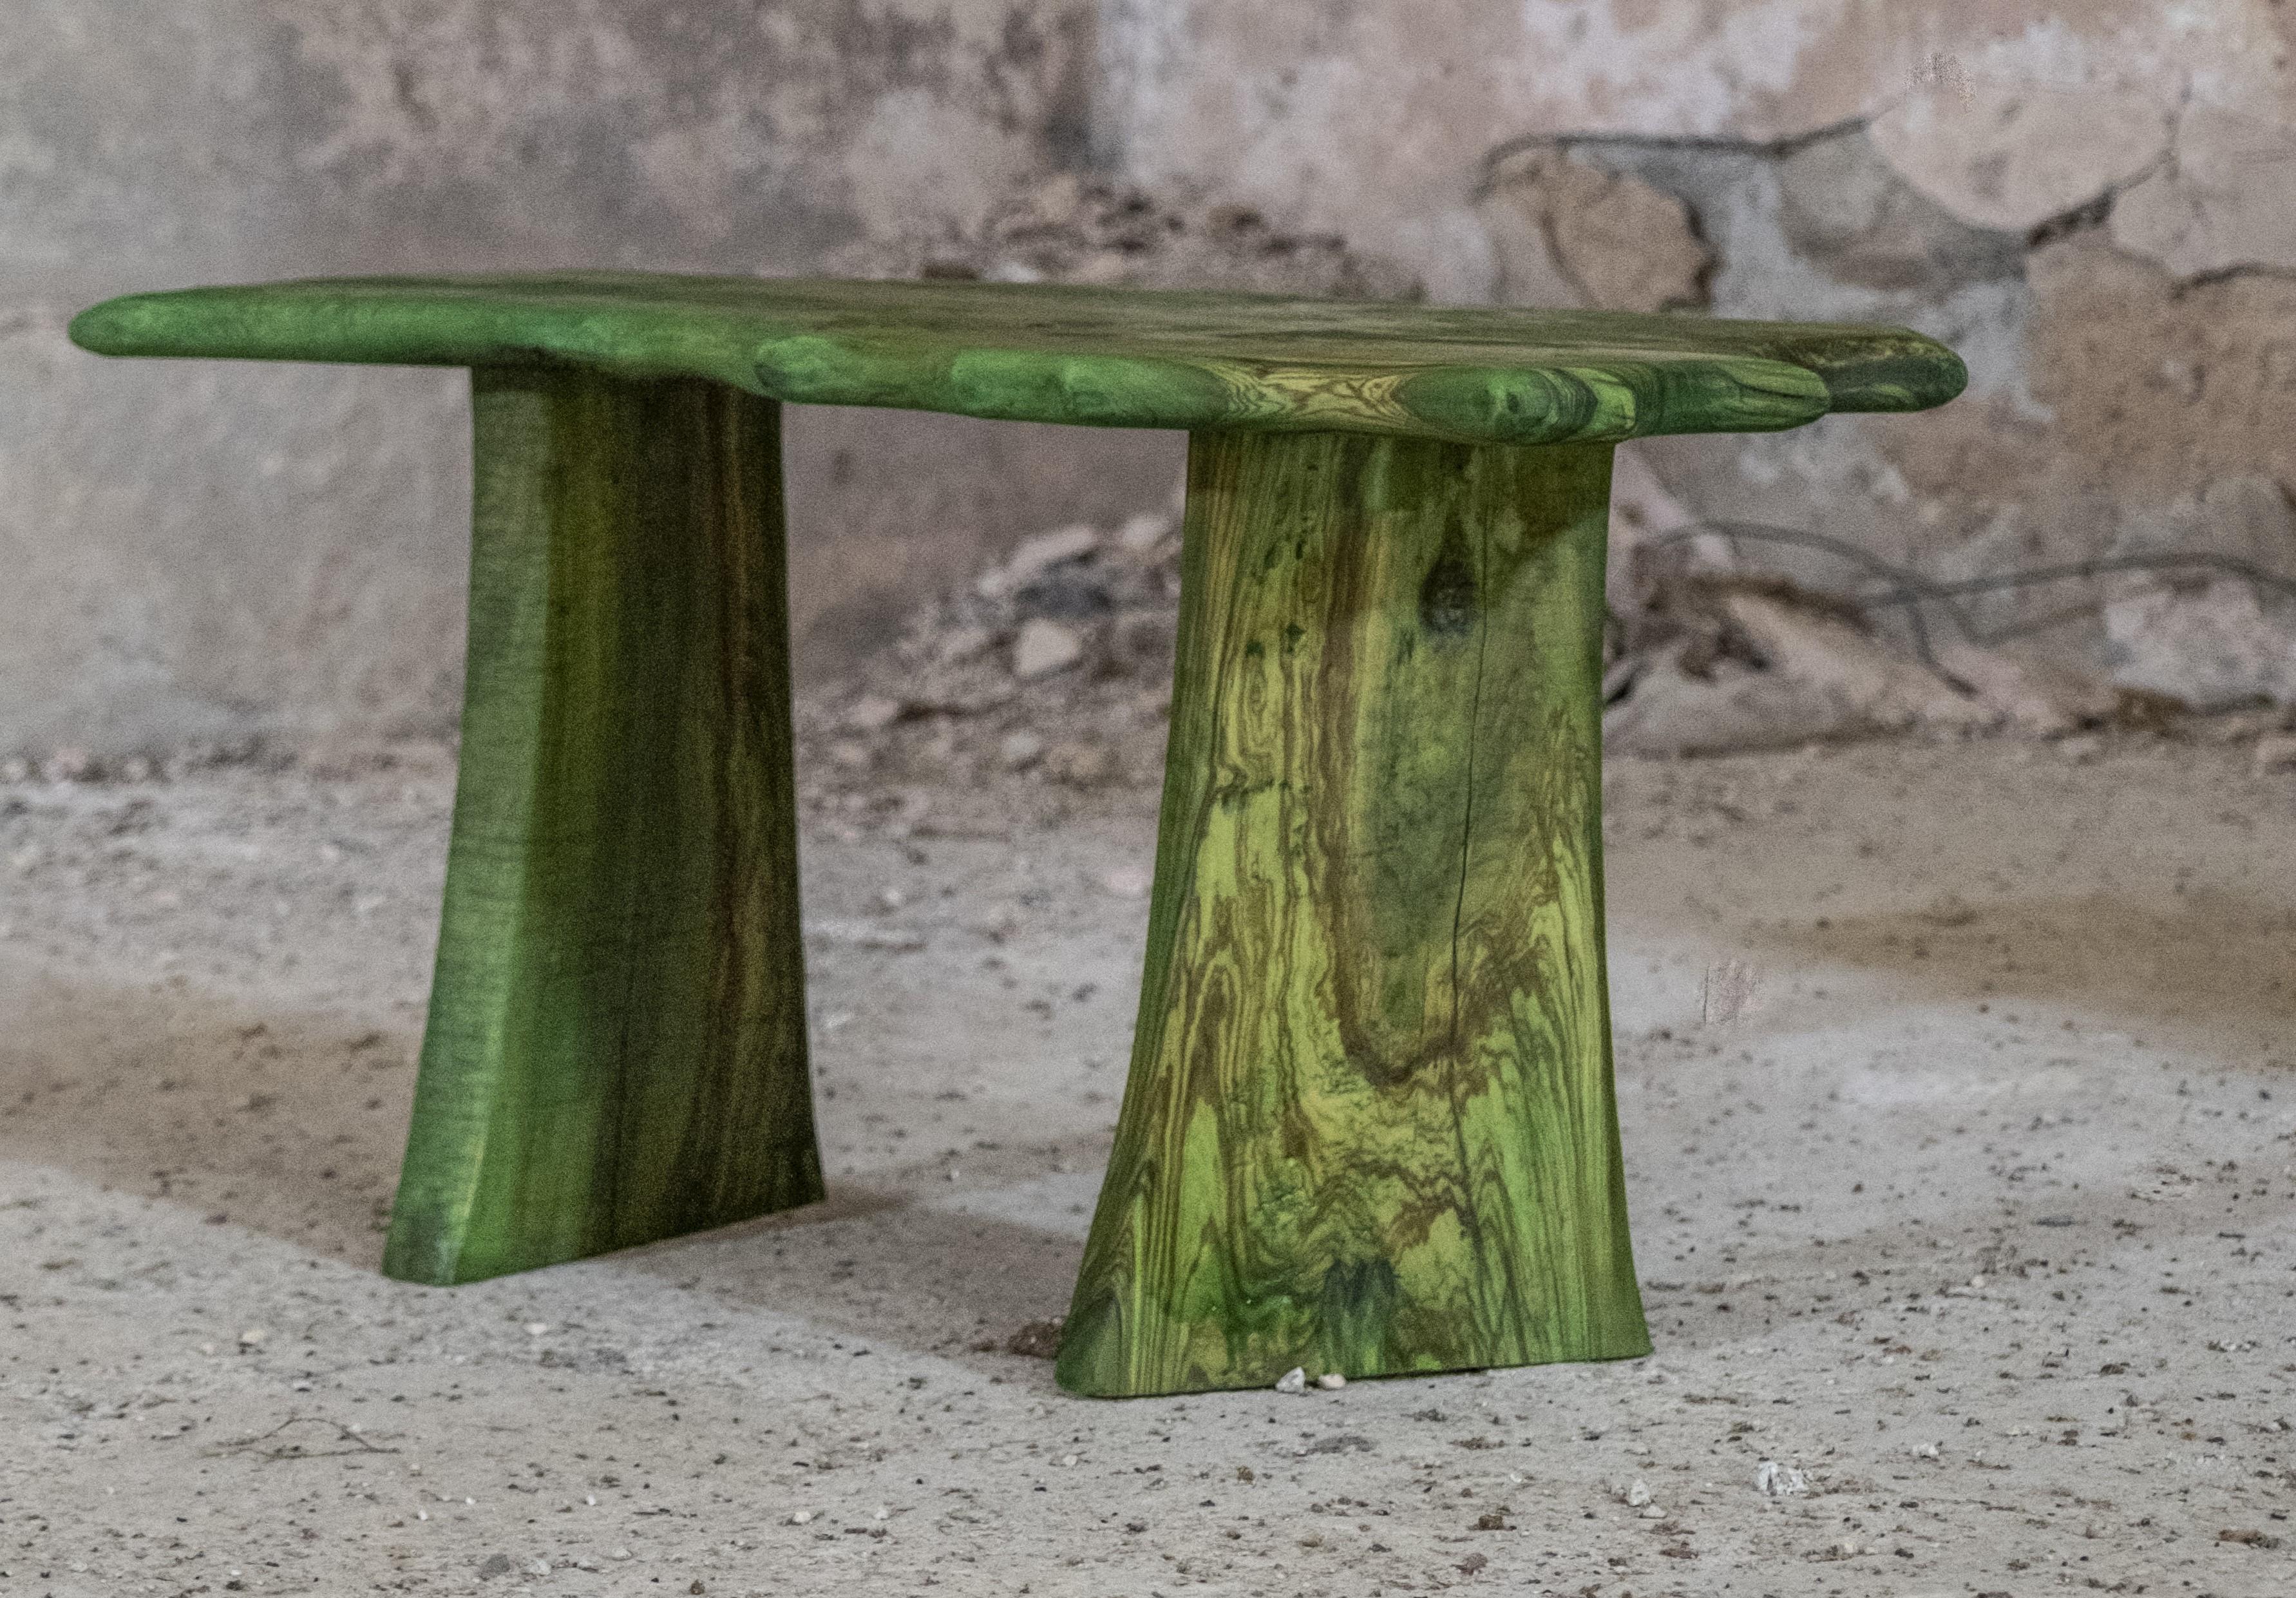 Unique olive wood coffee table by BehaghelFoiny
Unique piece
From the series 